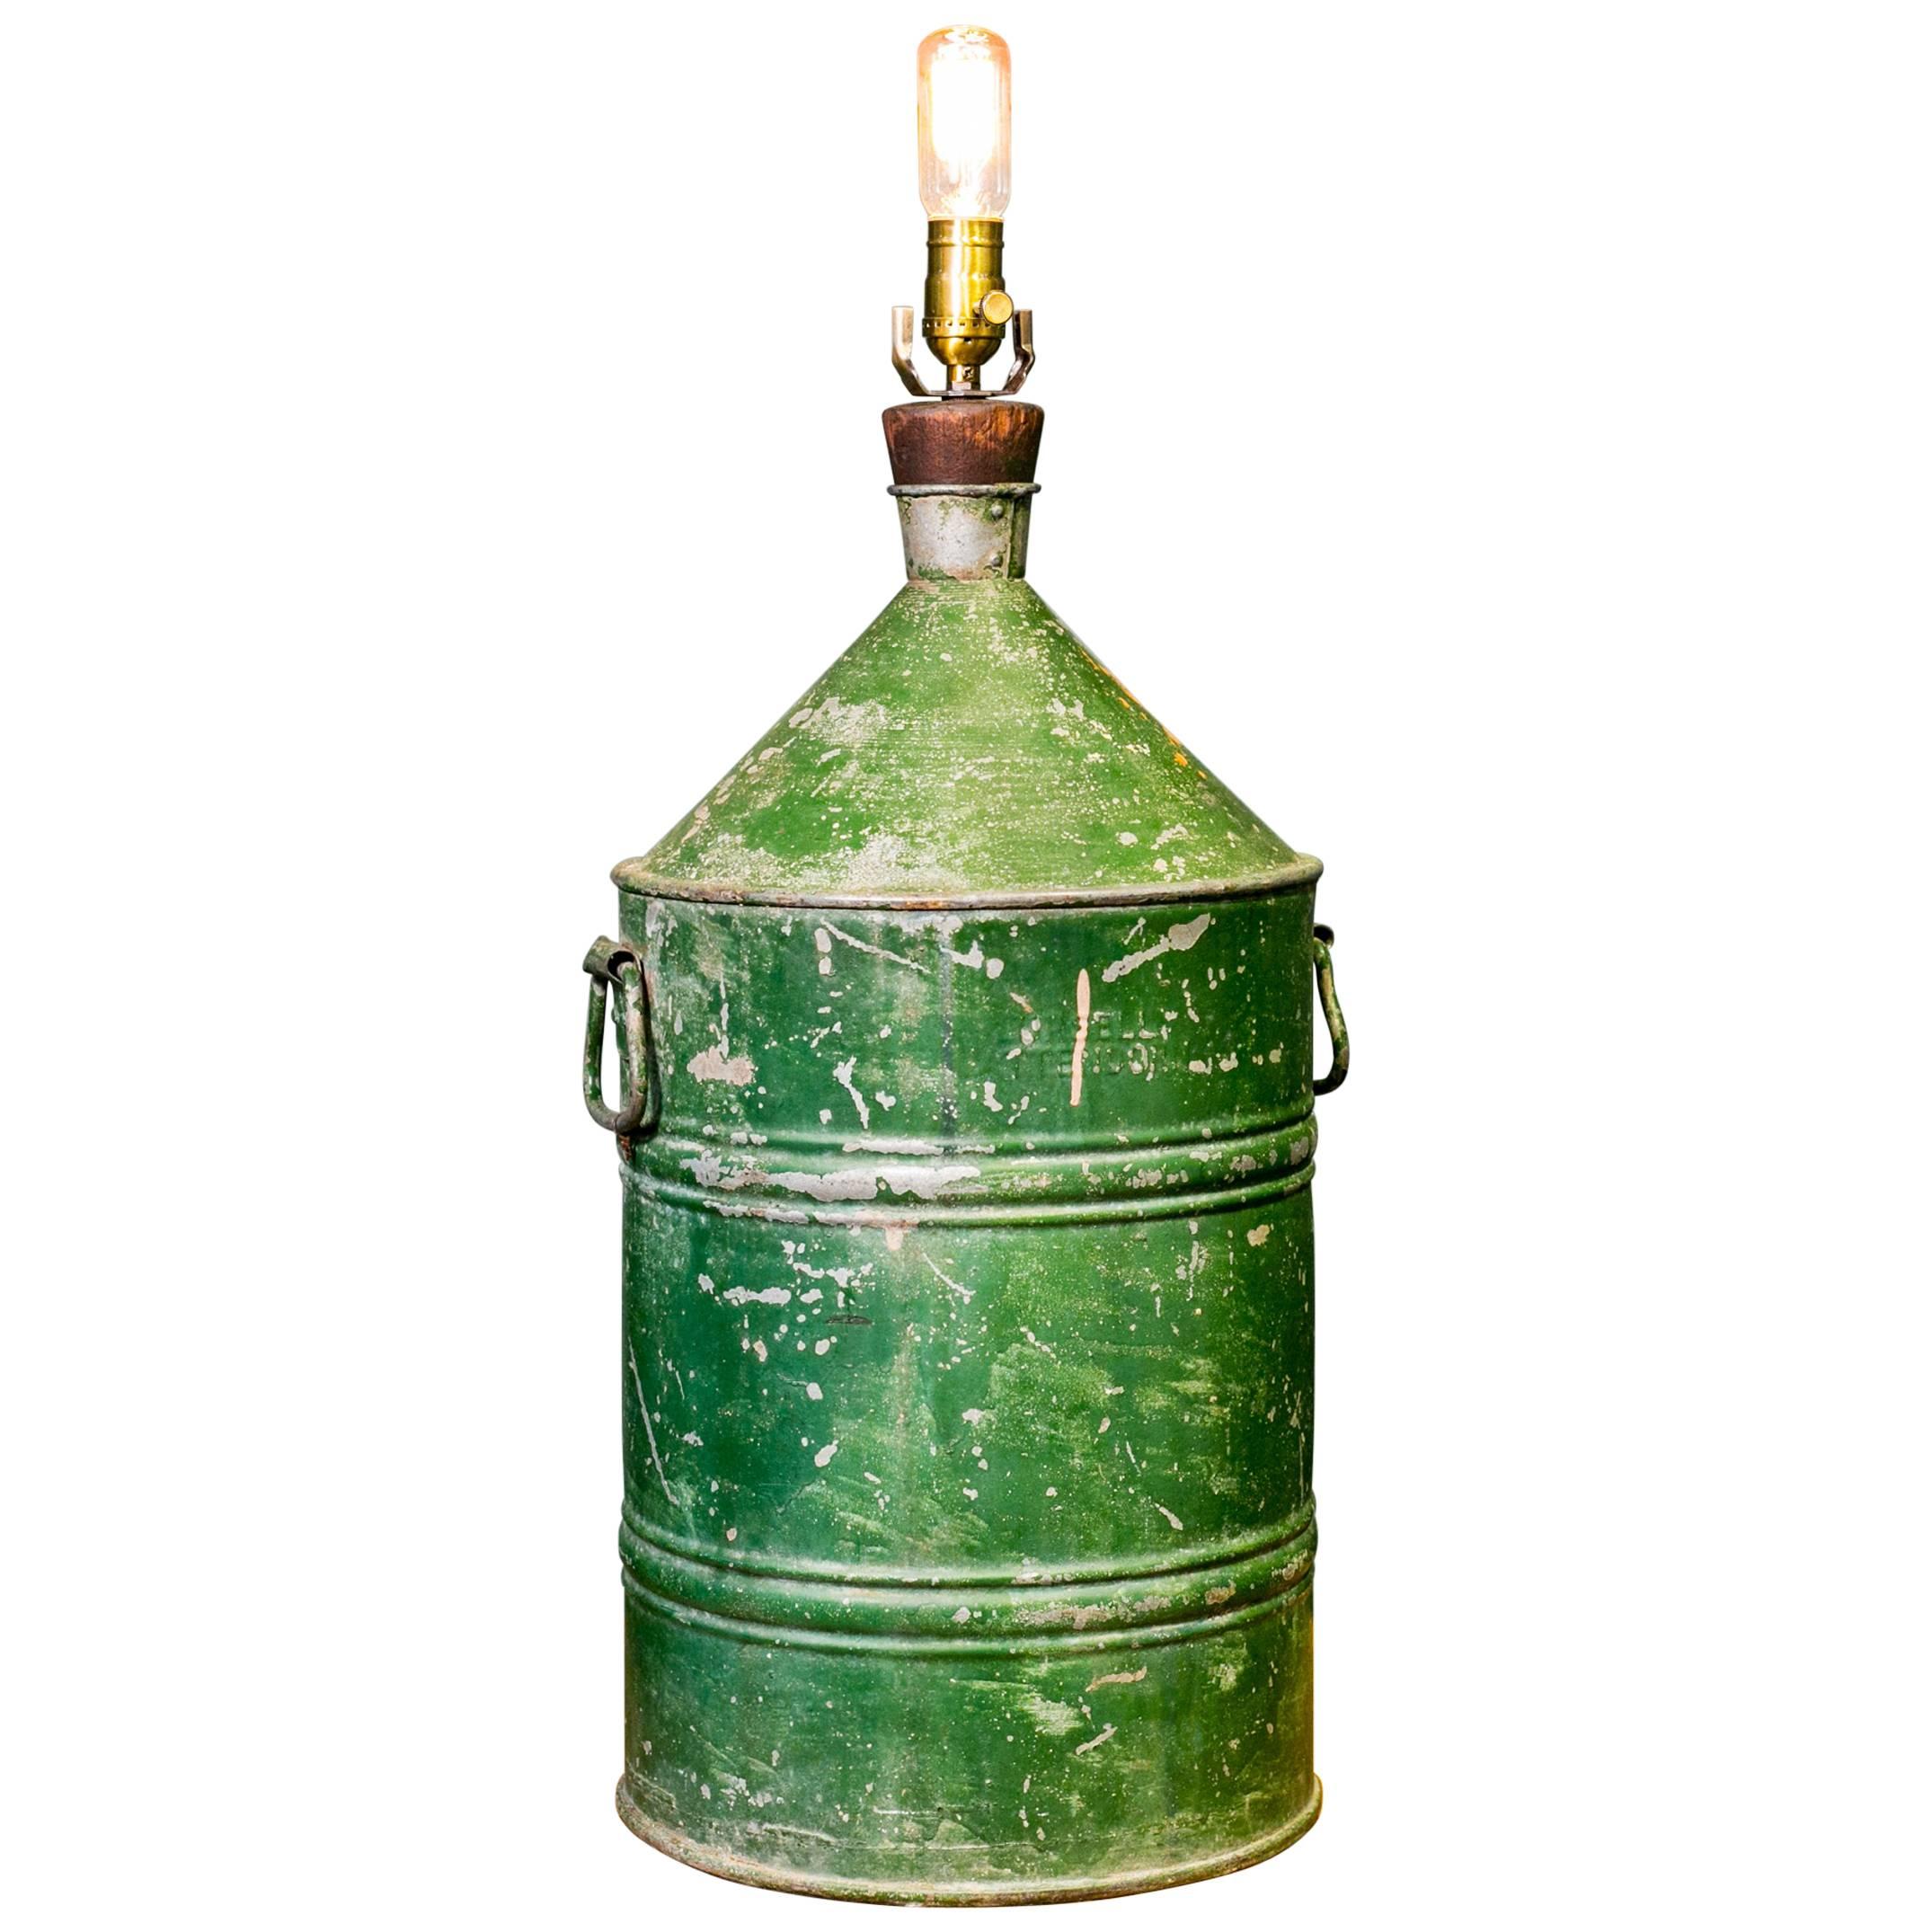 Rustic Painted Galvanized Vessel as Lamp